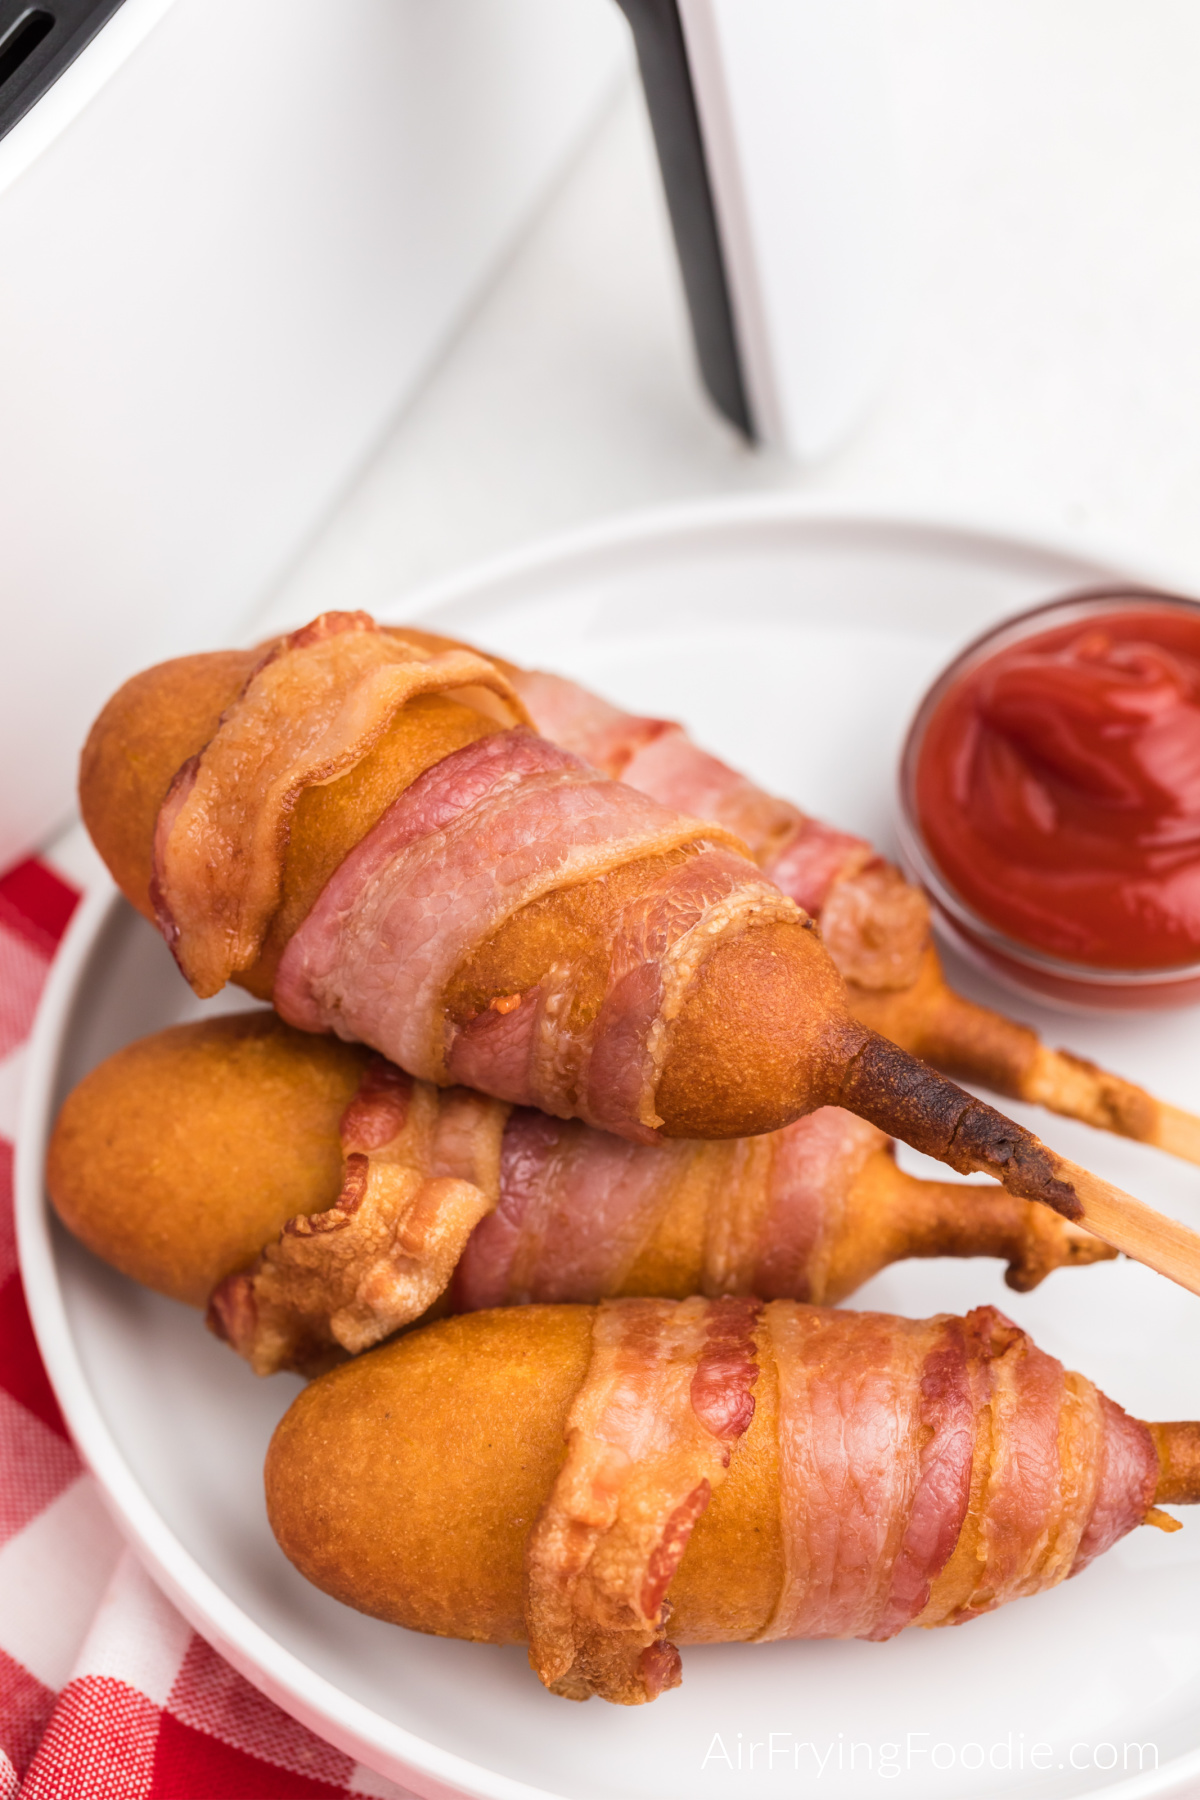 Bacon wrapped corn dogs on a white plate with a side of ketchup.